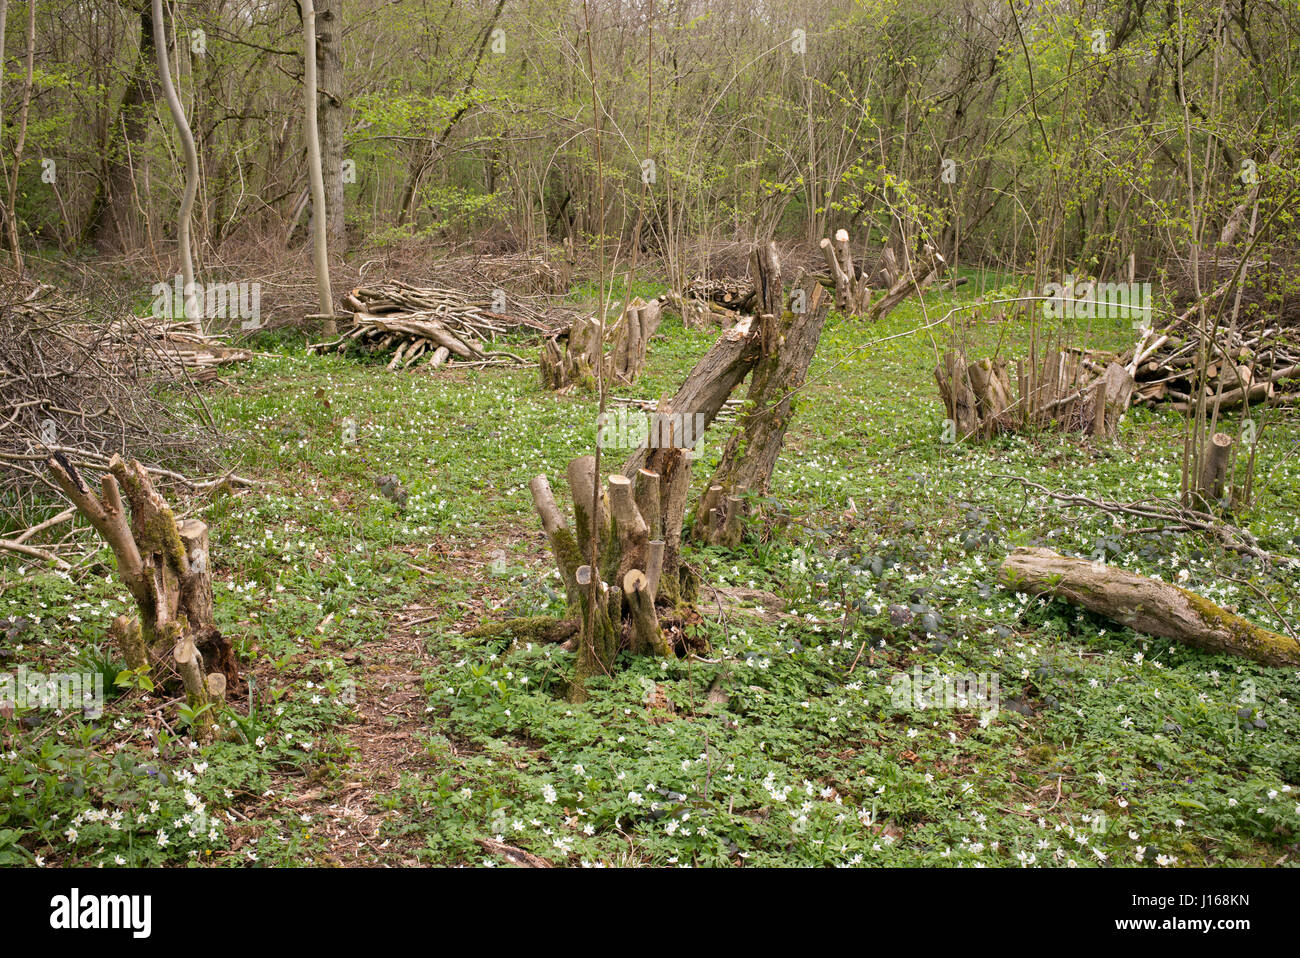 Coppiced hazel trees in an english woodland in spring. Oxfordshire, UK Stock Photo